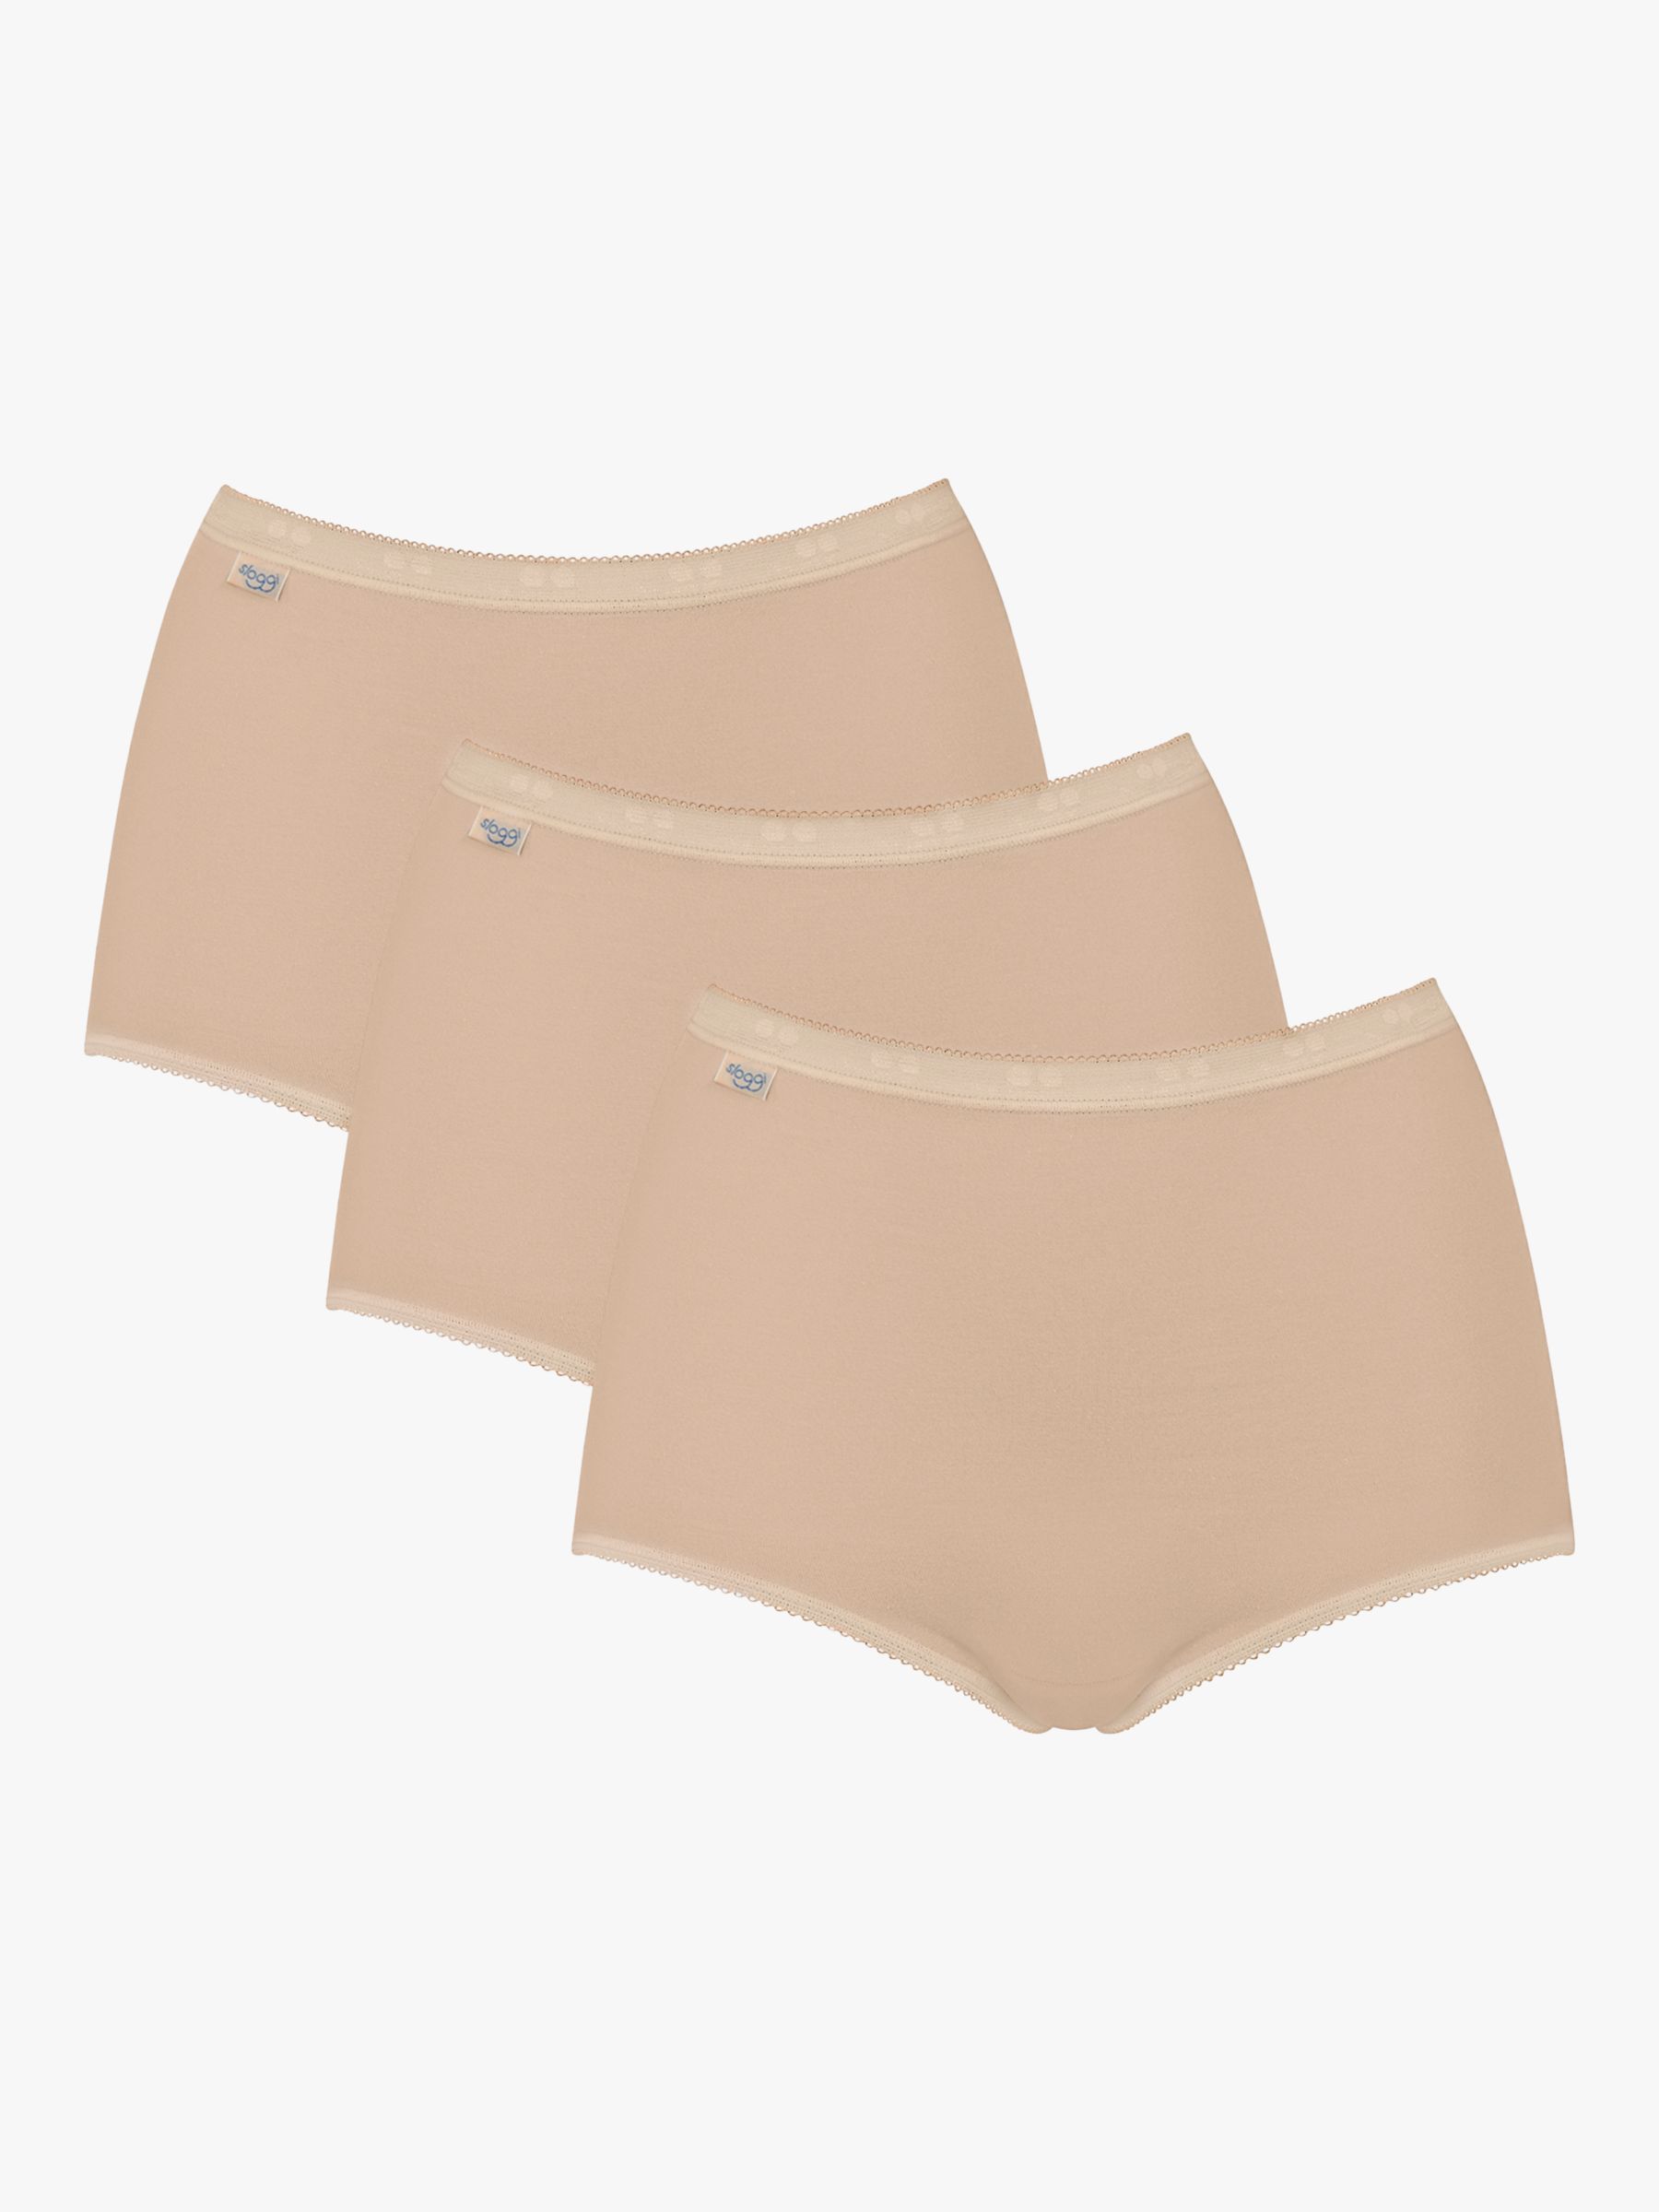 sloggi Basic+ Maxi Cotton Briefs, Pack of 3, Green/Lilac/Yellow at John  Lewis & Partners